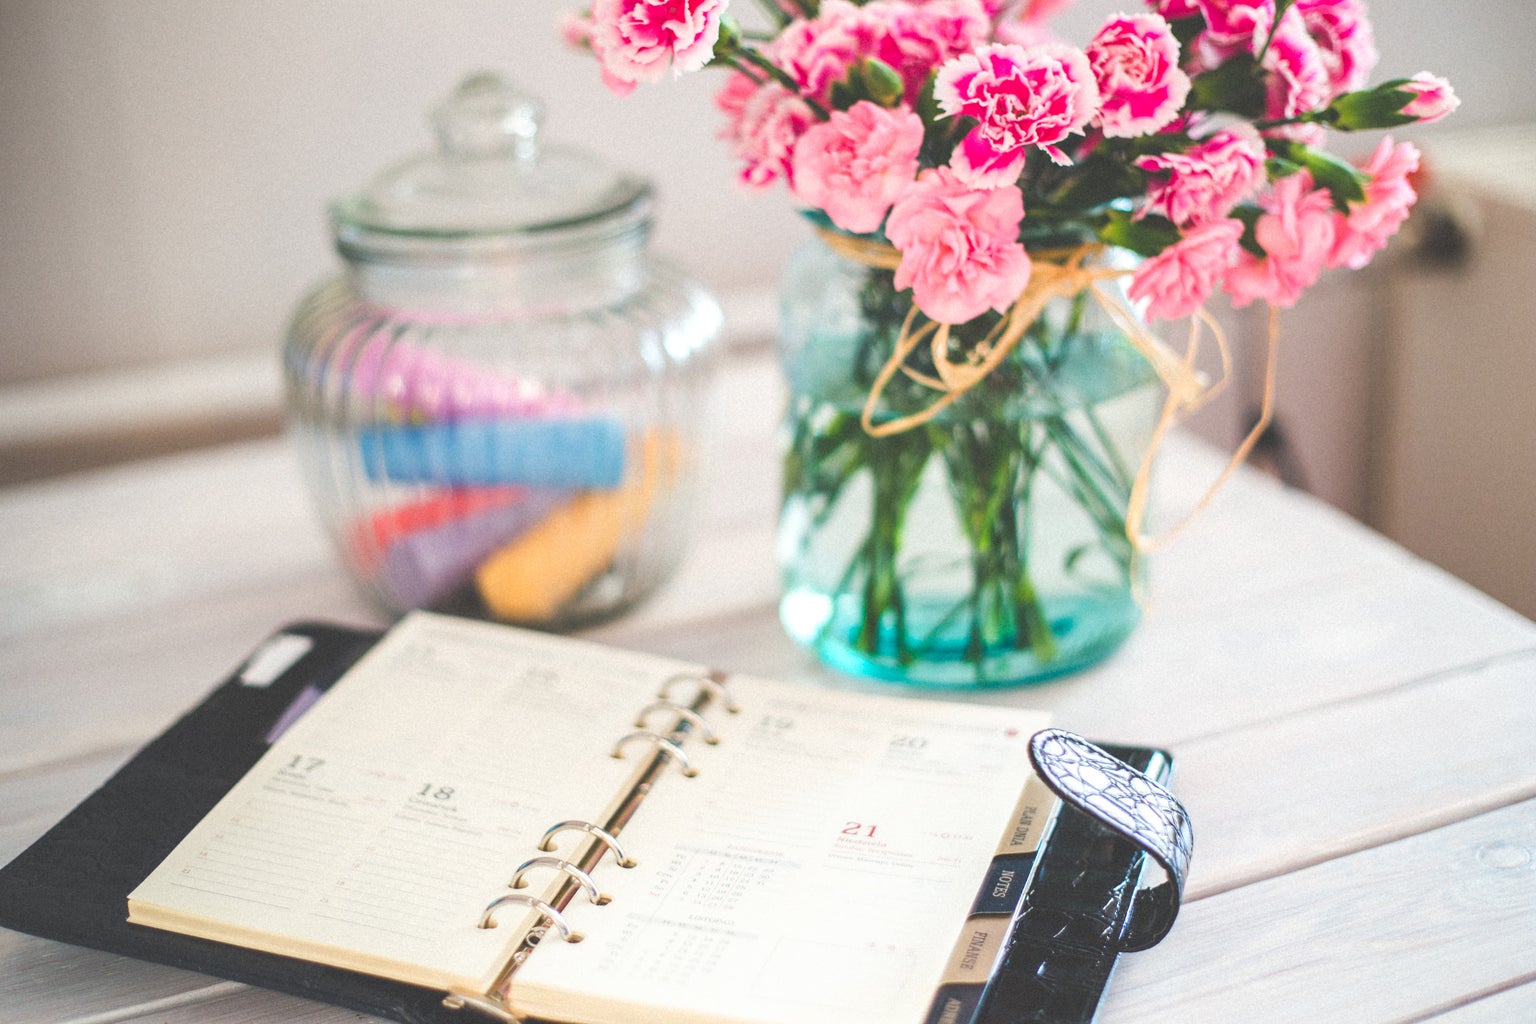 planner and pink flowers on desk